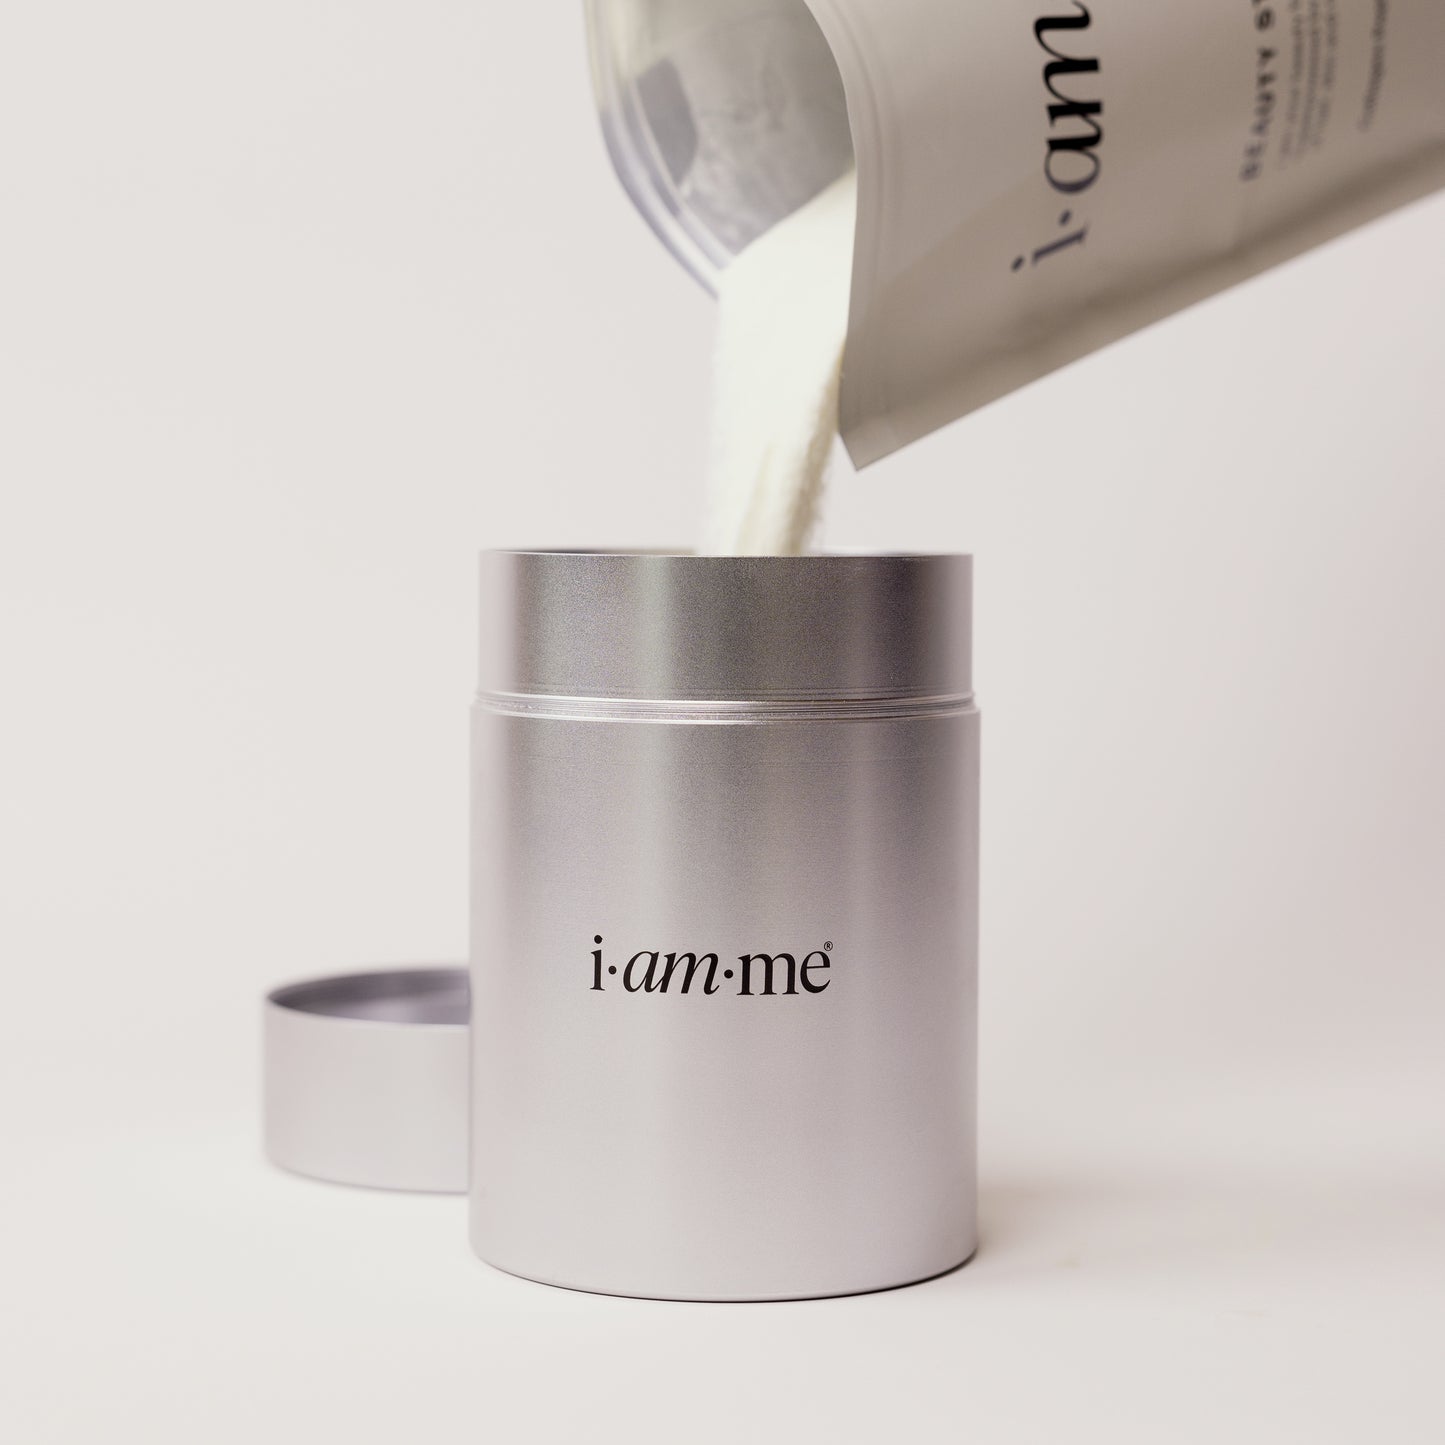 Infinitely reusable and recyclable aluminium canisters